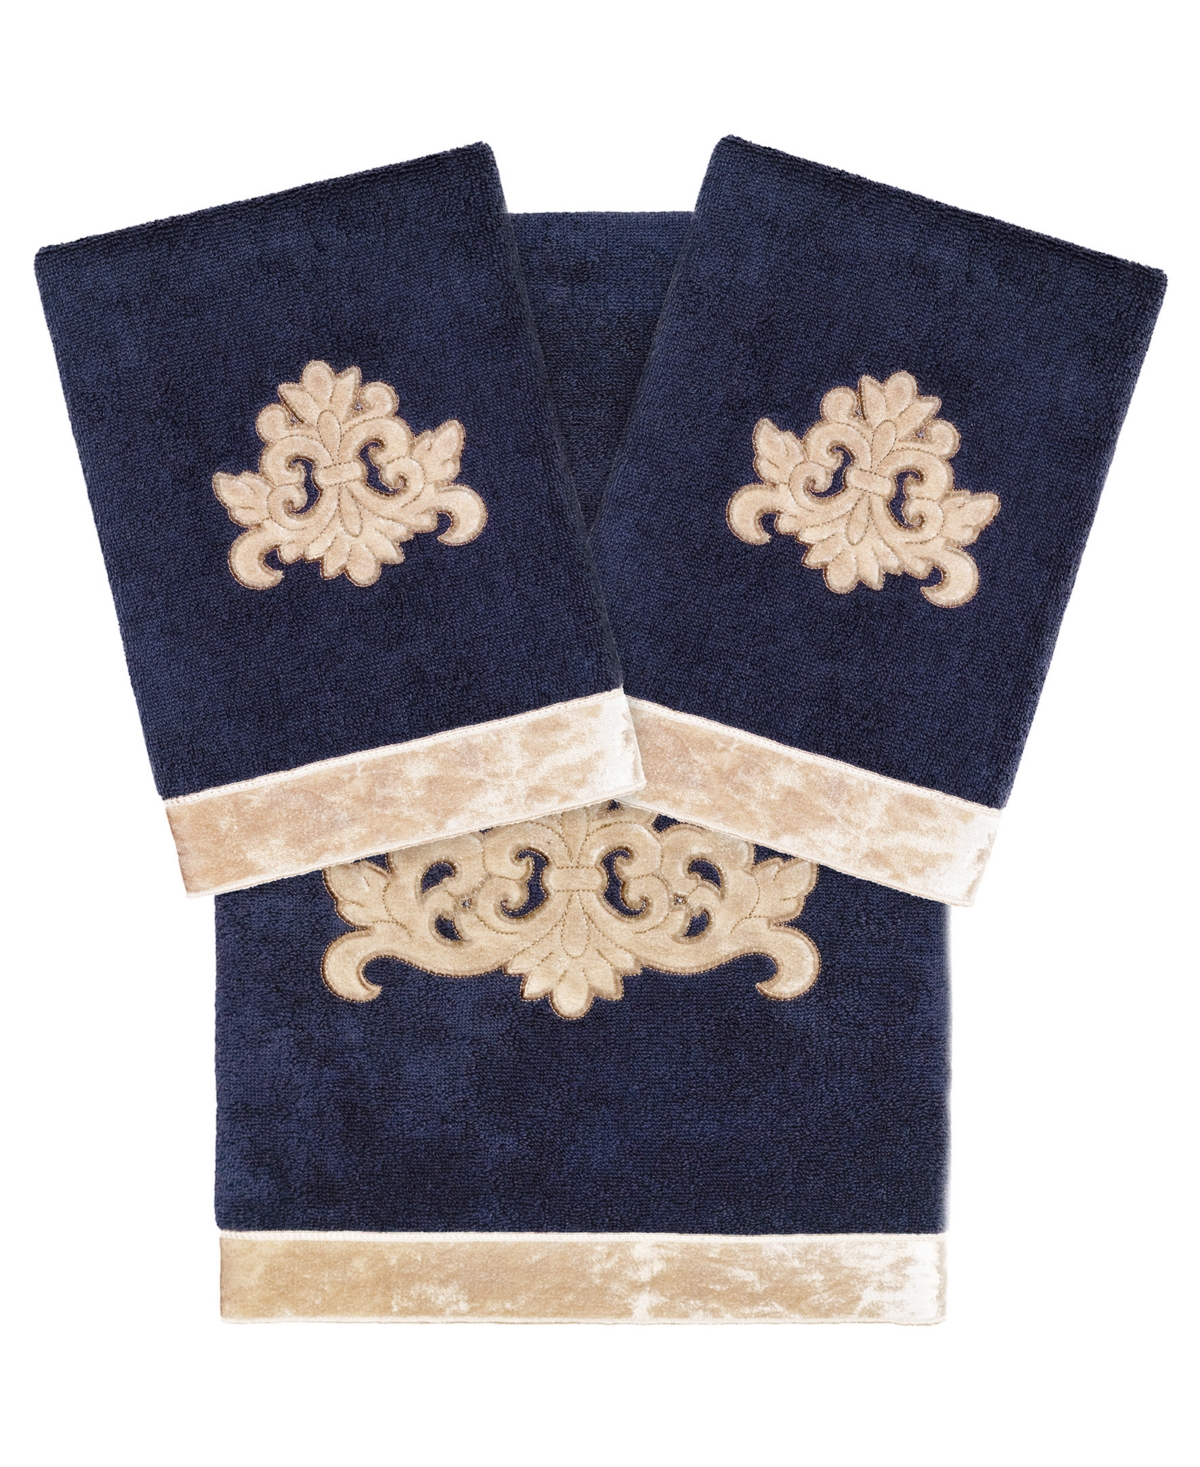 Linum Home Textiles Turkish Cotton May Embellished Towel Set, 3 Piece In Marine